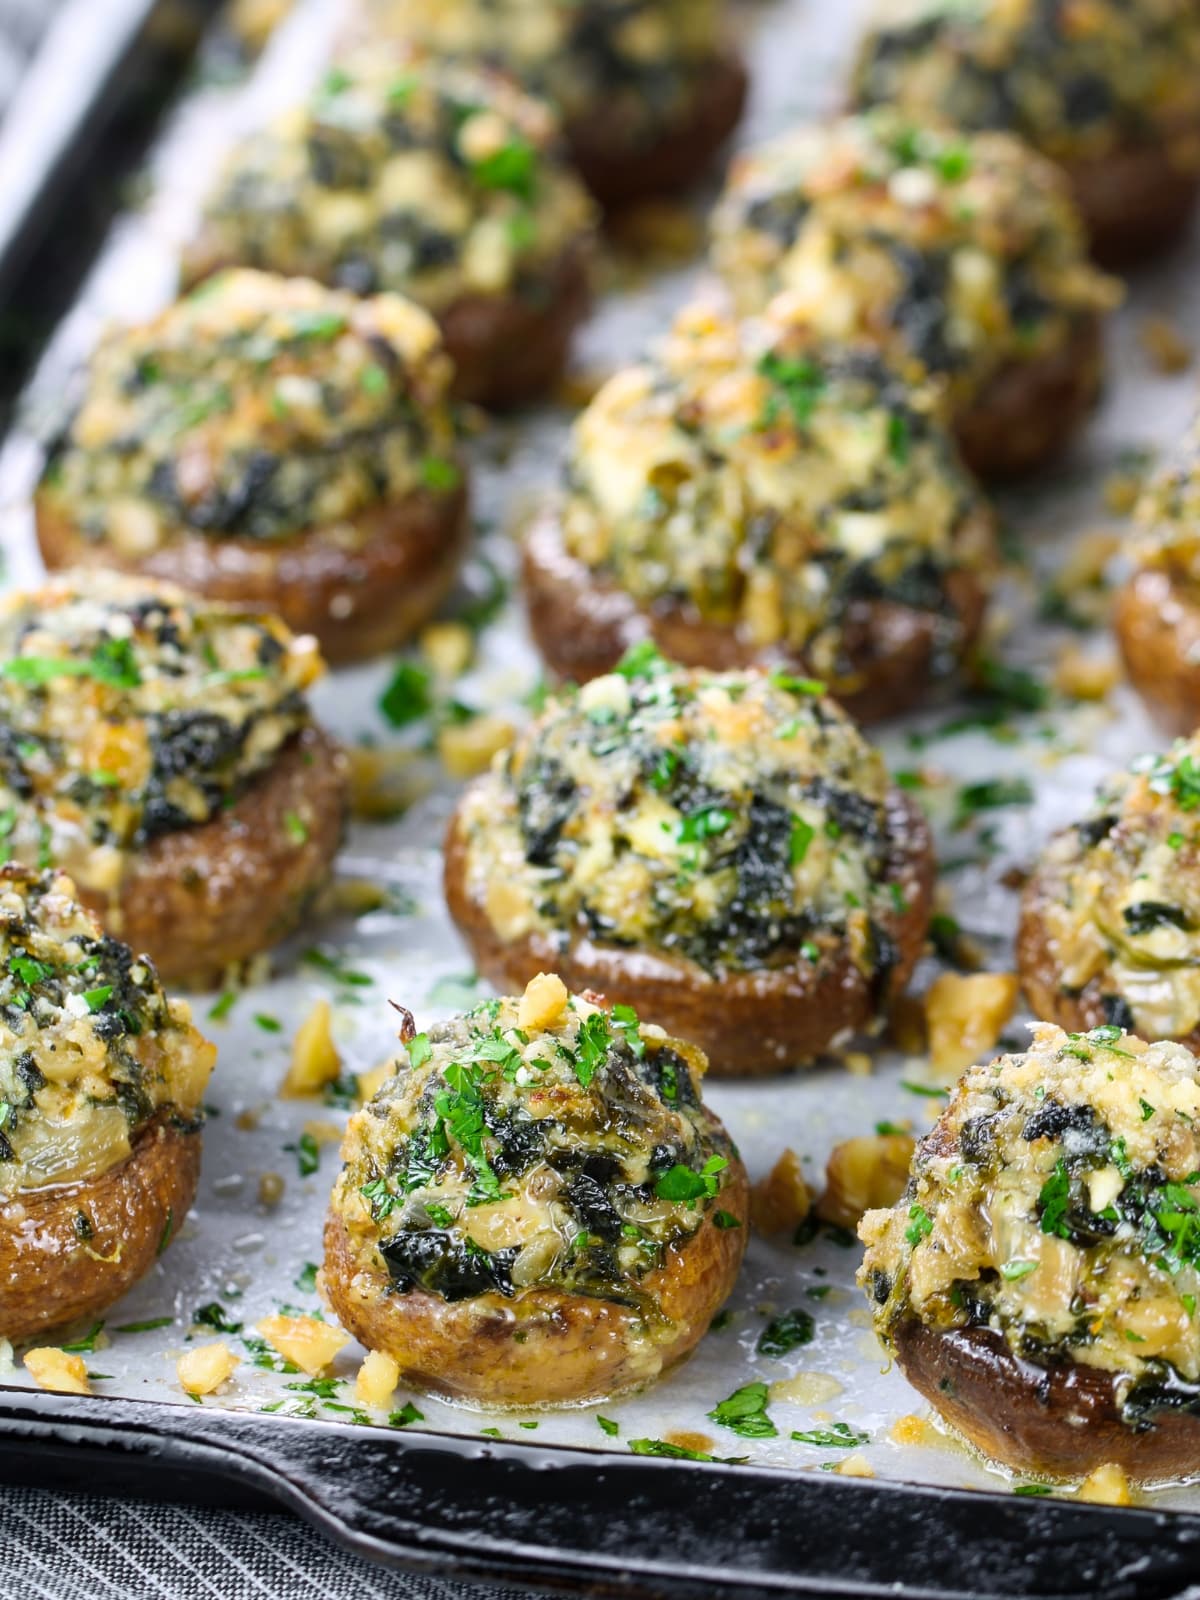 Appetizer recipes - Stuffed Mushrooms with Spinach, Feta And Walnuts on a baking sheet.